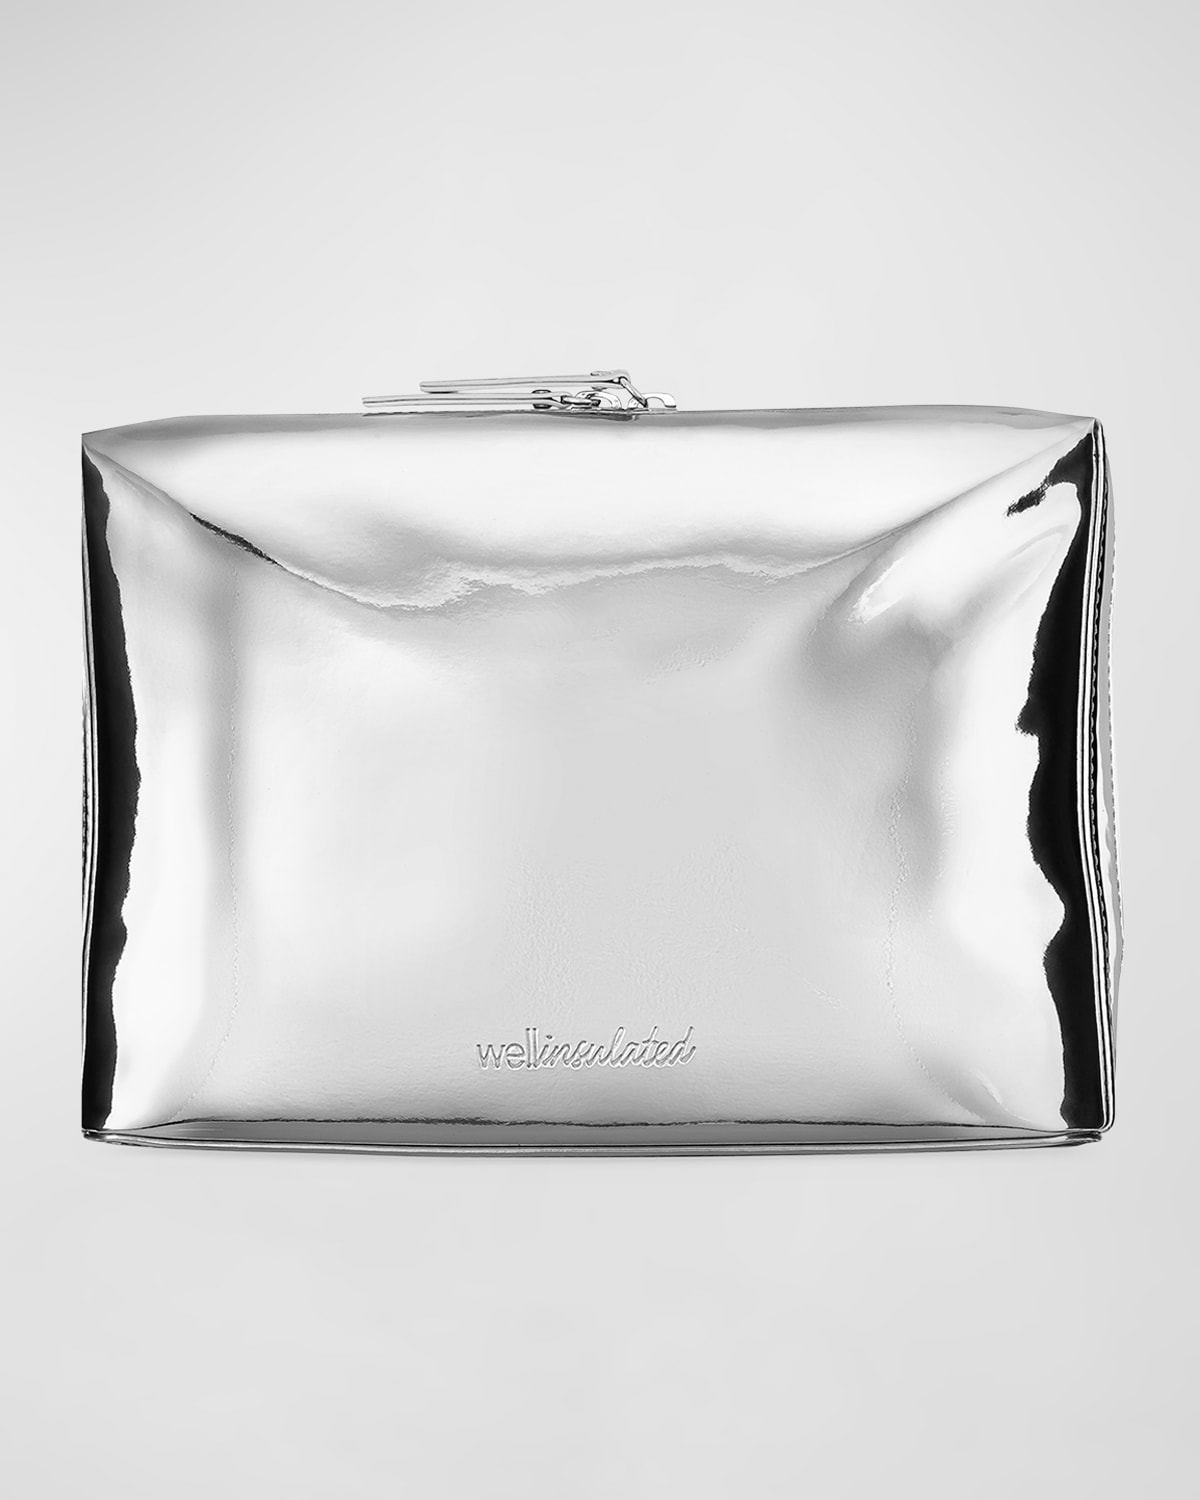 Wellinsulated Performance Beauty Bag, Large In White